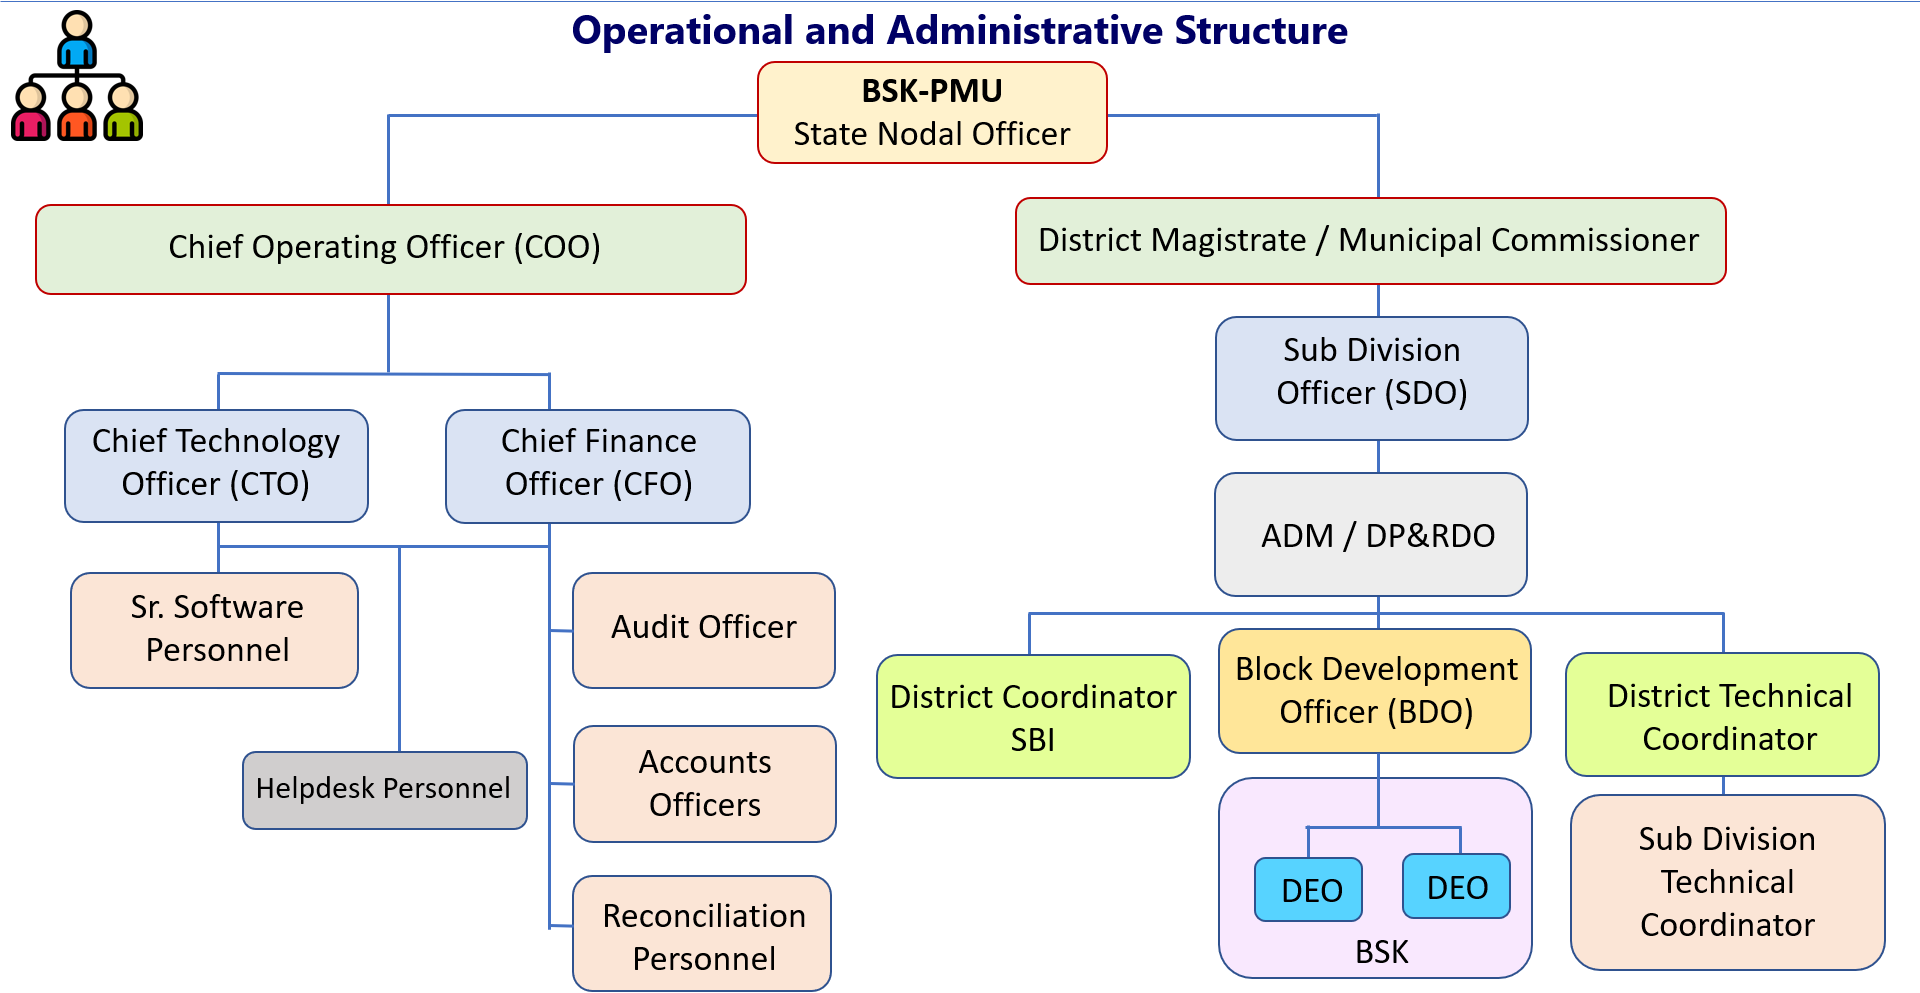 Operational and Administrative Structure of BSK